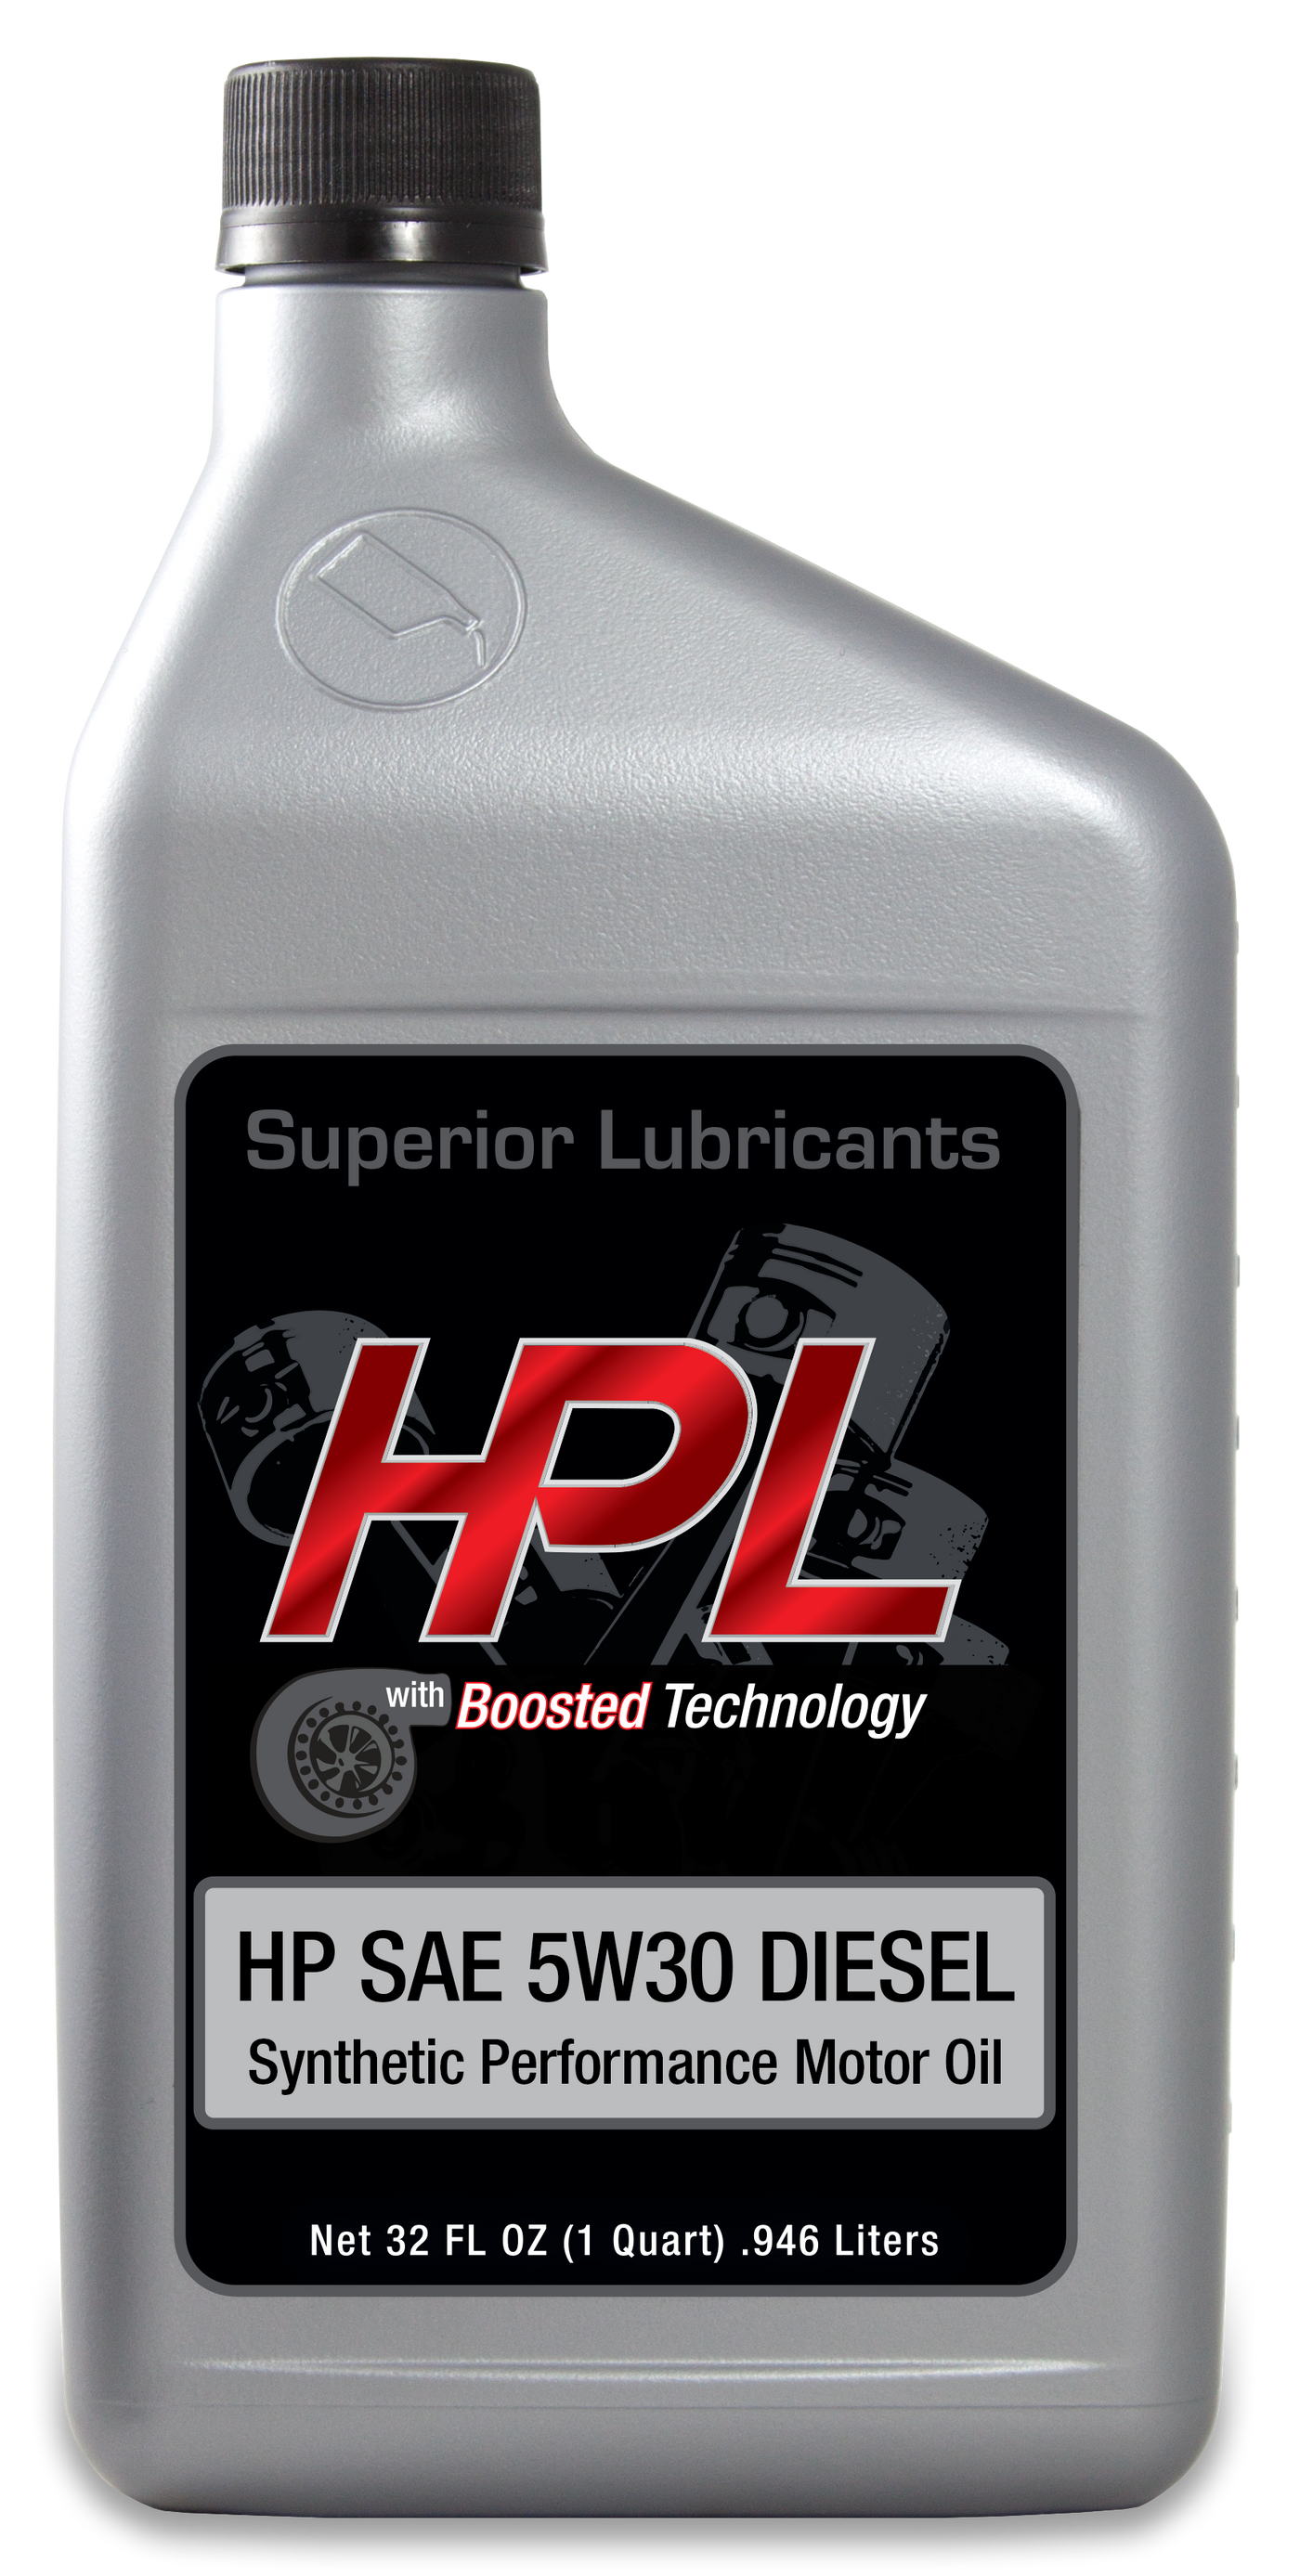 HP coolant! Let your vehicle run... - HP Lubricants Nepal | Facebook